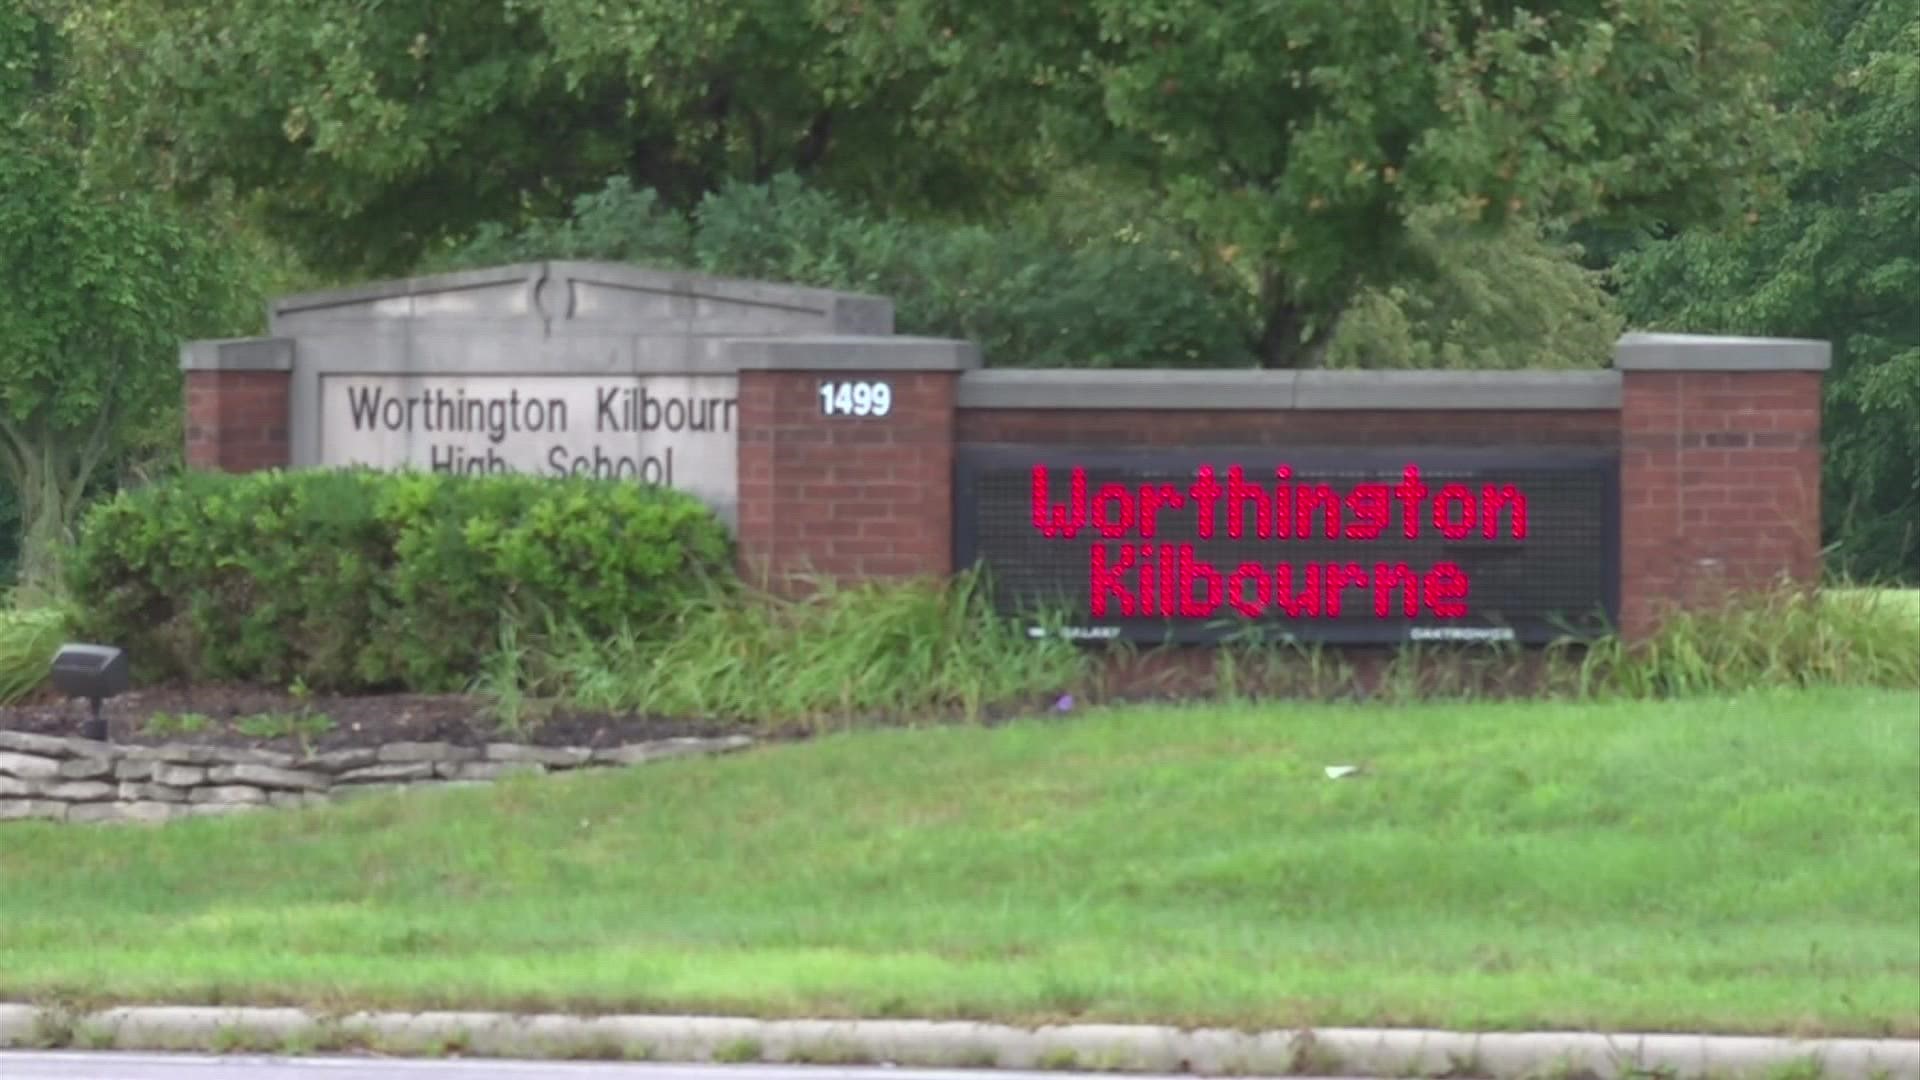 During Monday's school board meeting, one Worthington parent videotaped a woman giving a Nazi salute.